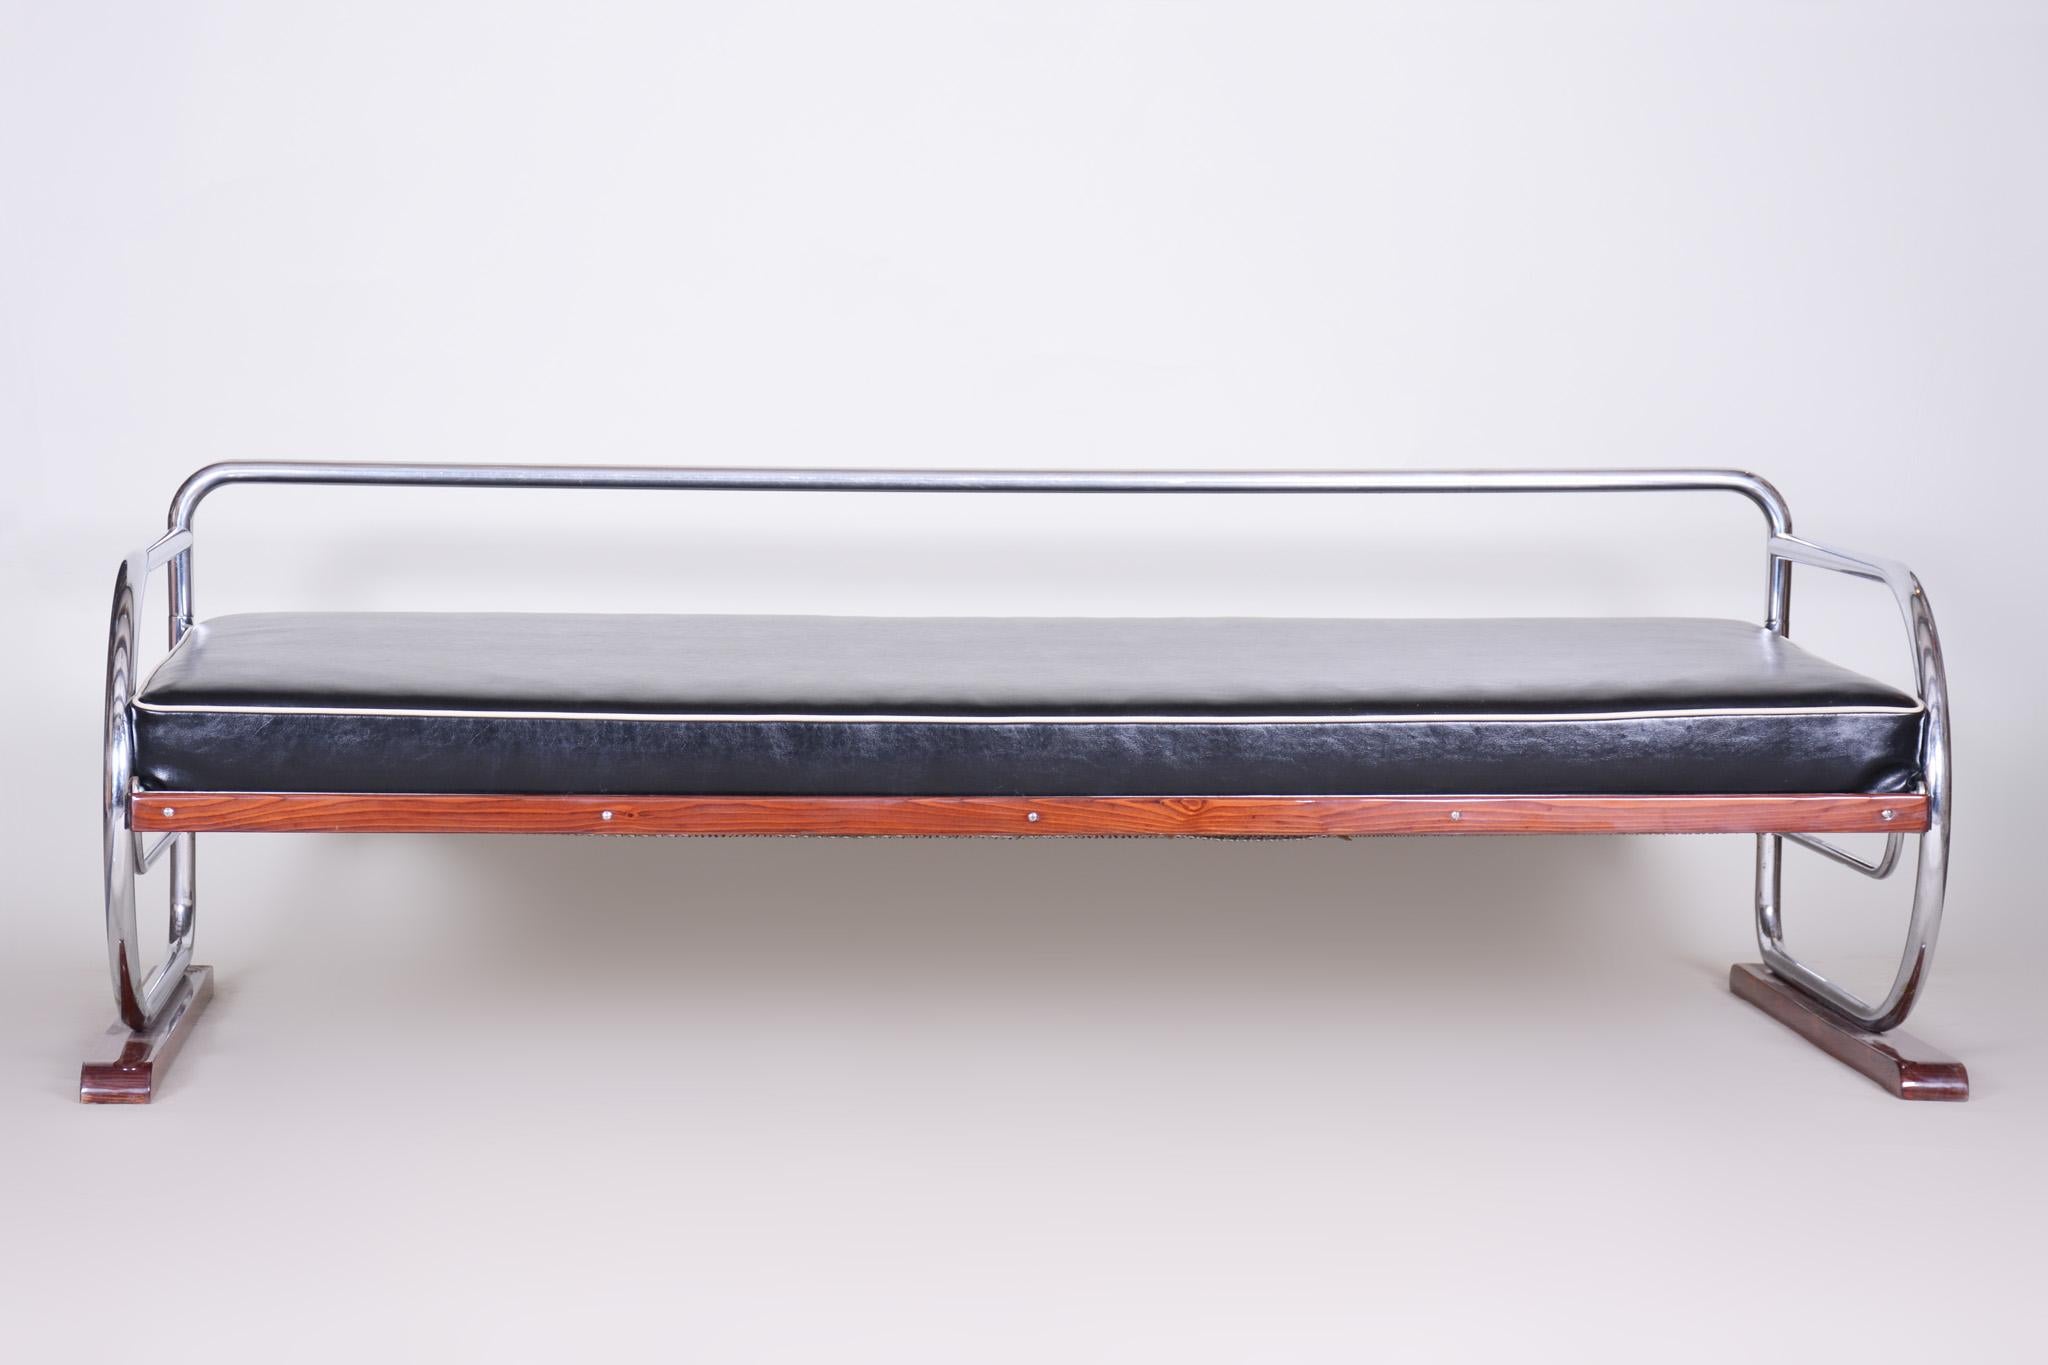 Bauhaus style sofa with a lacquered wood and chrome tubular steel frame.
Manufactured by Robert Slezák in the 1930s.
Chrome tubular steel is in perfect original condition.
Upholstered to high quality black leather.
Source: Czechia